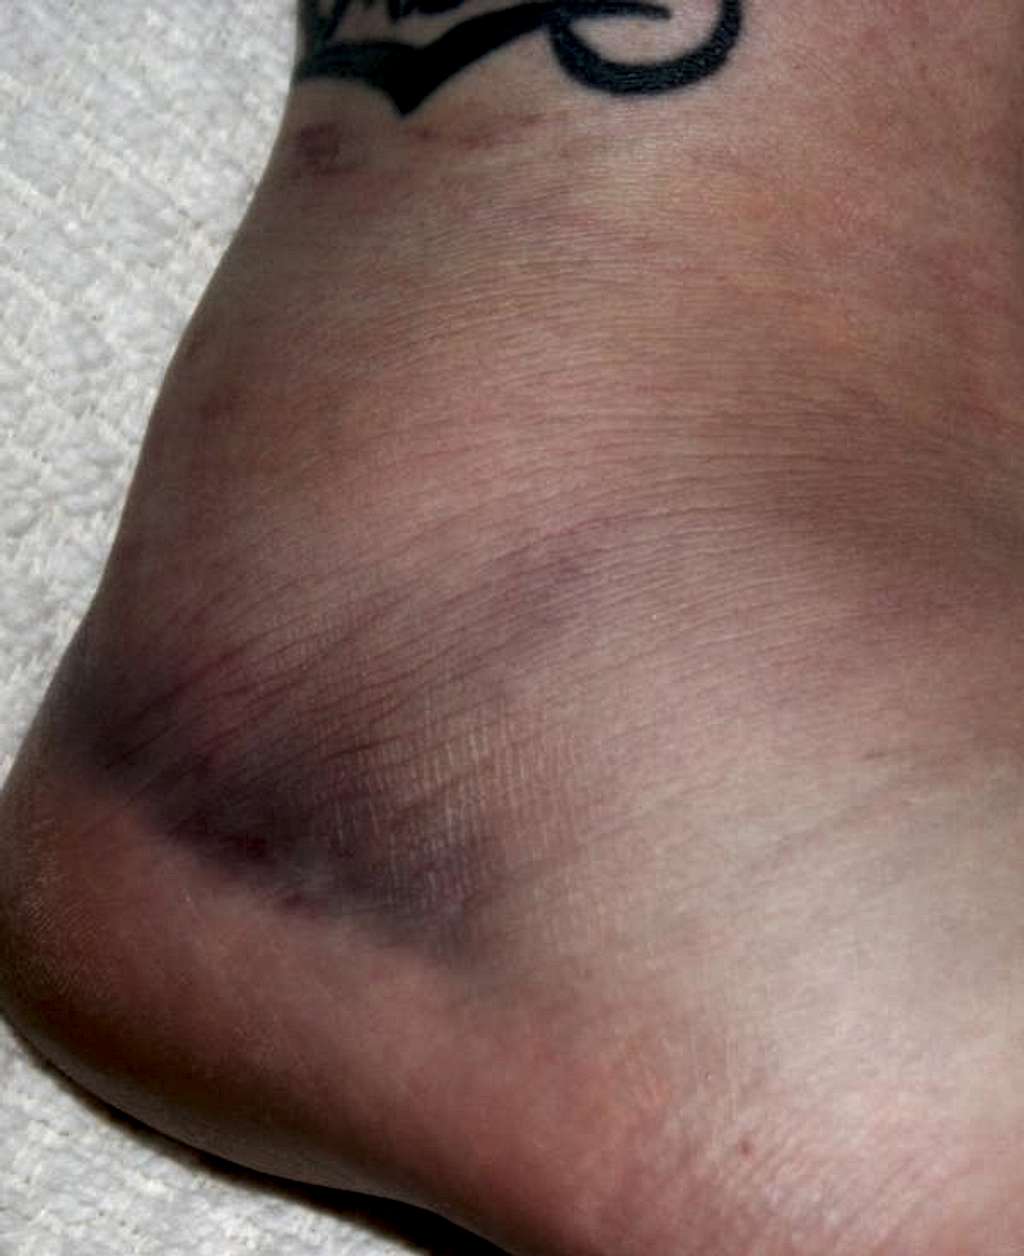 My Ankle Now (3 days later 2)